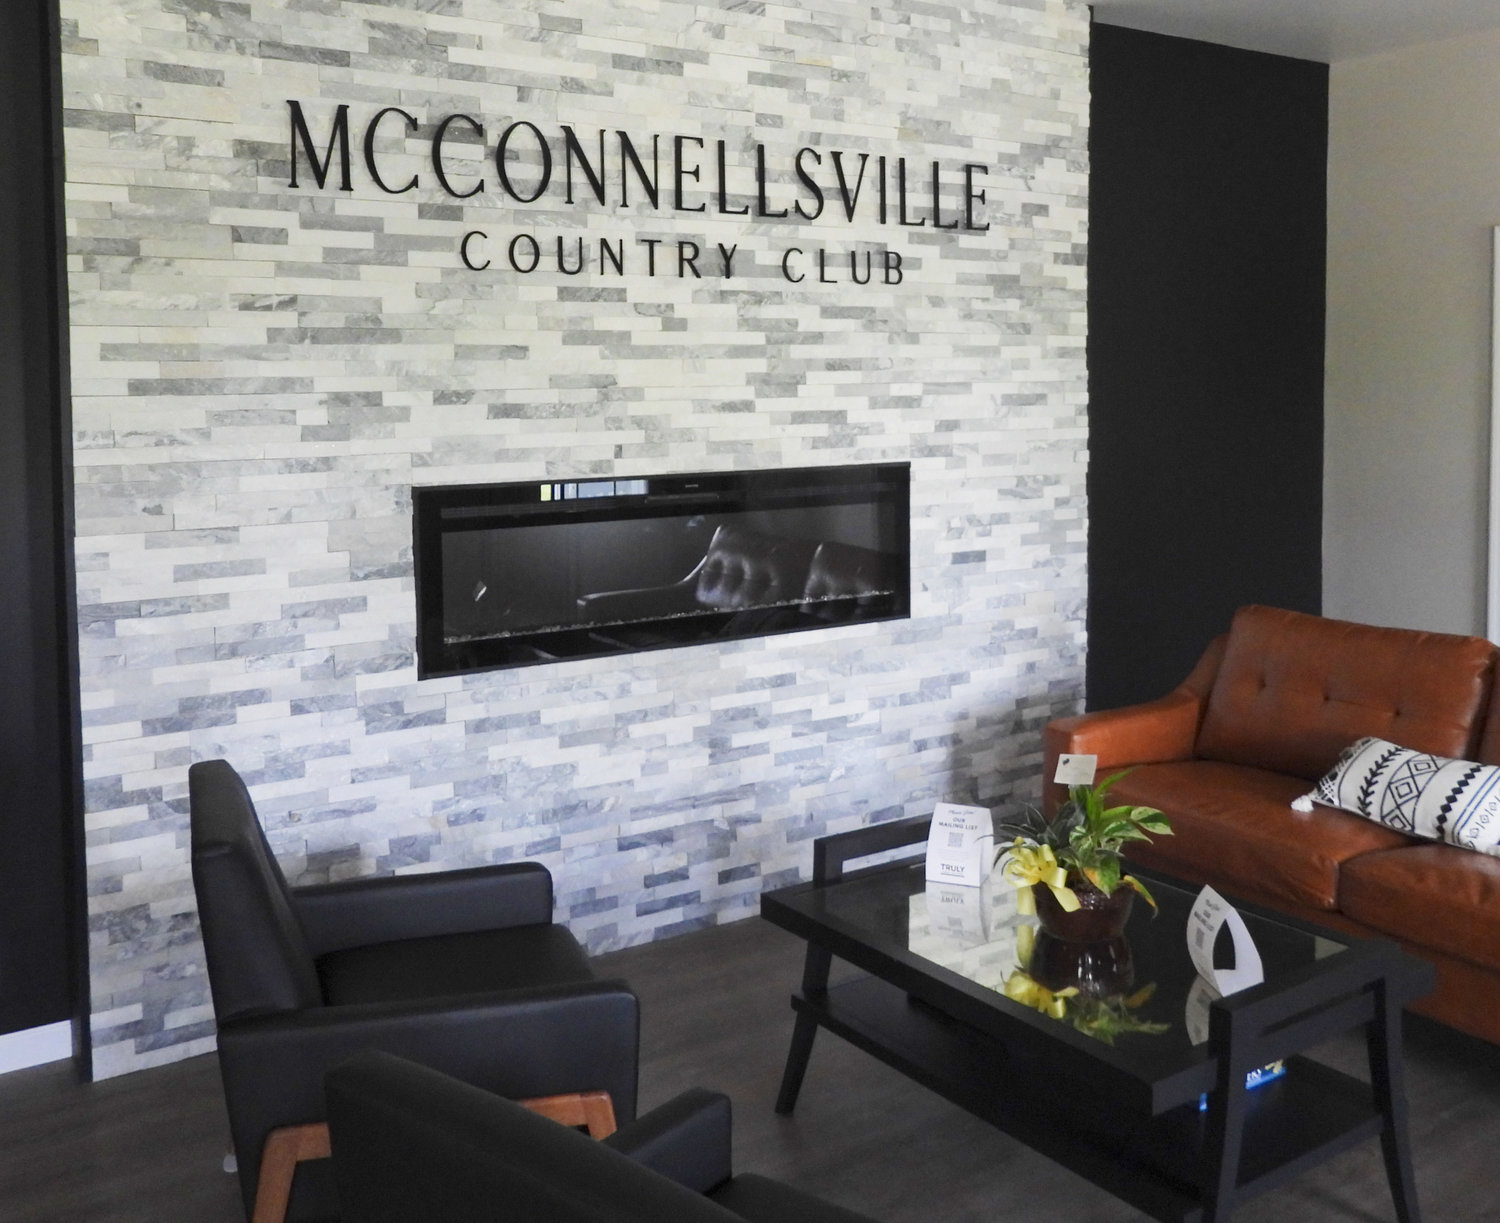 McConnellsville Country Club is under new management and owners Todd and Cindy Bowman are looking to continue the Club's legacy while bringing positive changes that build on it. One of the Club's newest additions is a fireplace, which is nestled right into the wall and one of the first things people see upong entering